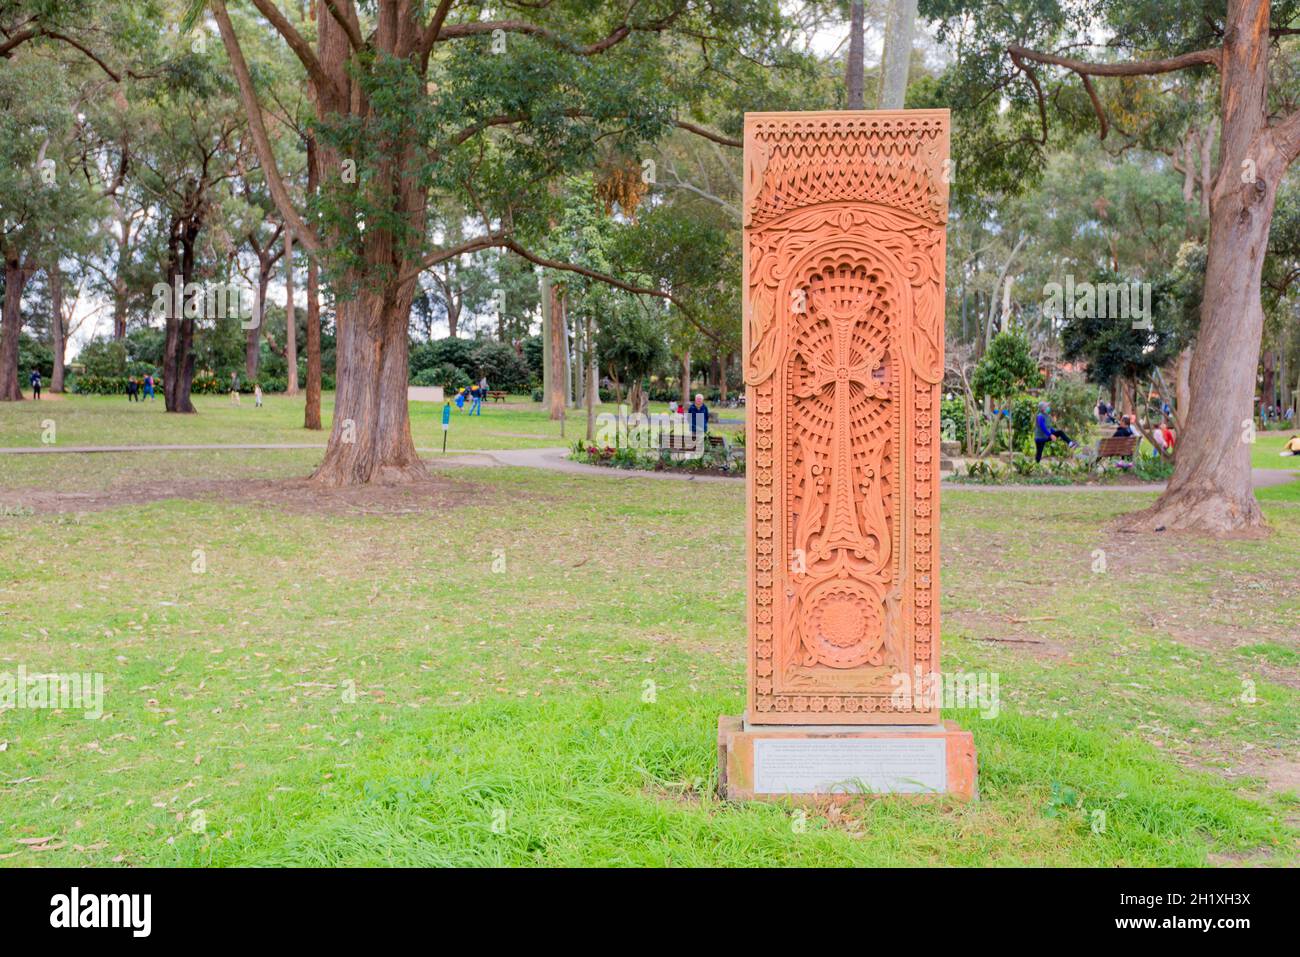 An khachkar, also known as an Armenian cross-stone in Beauchamp Park, Chatswood, Sydney, Australia was donated in 2015 by the local Apostolic church Stock Photo